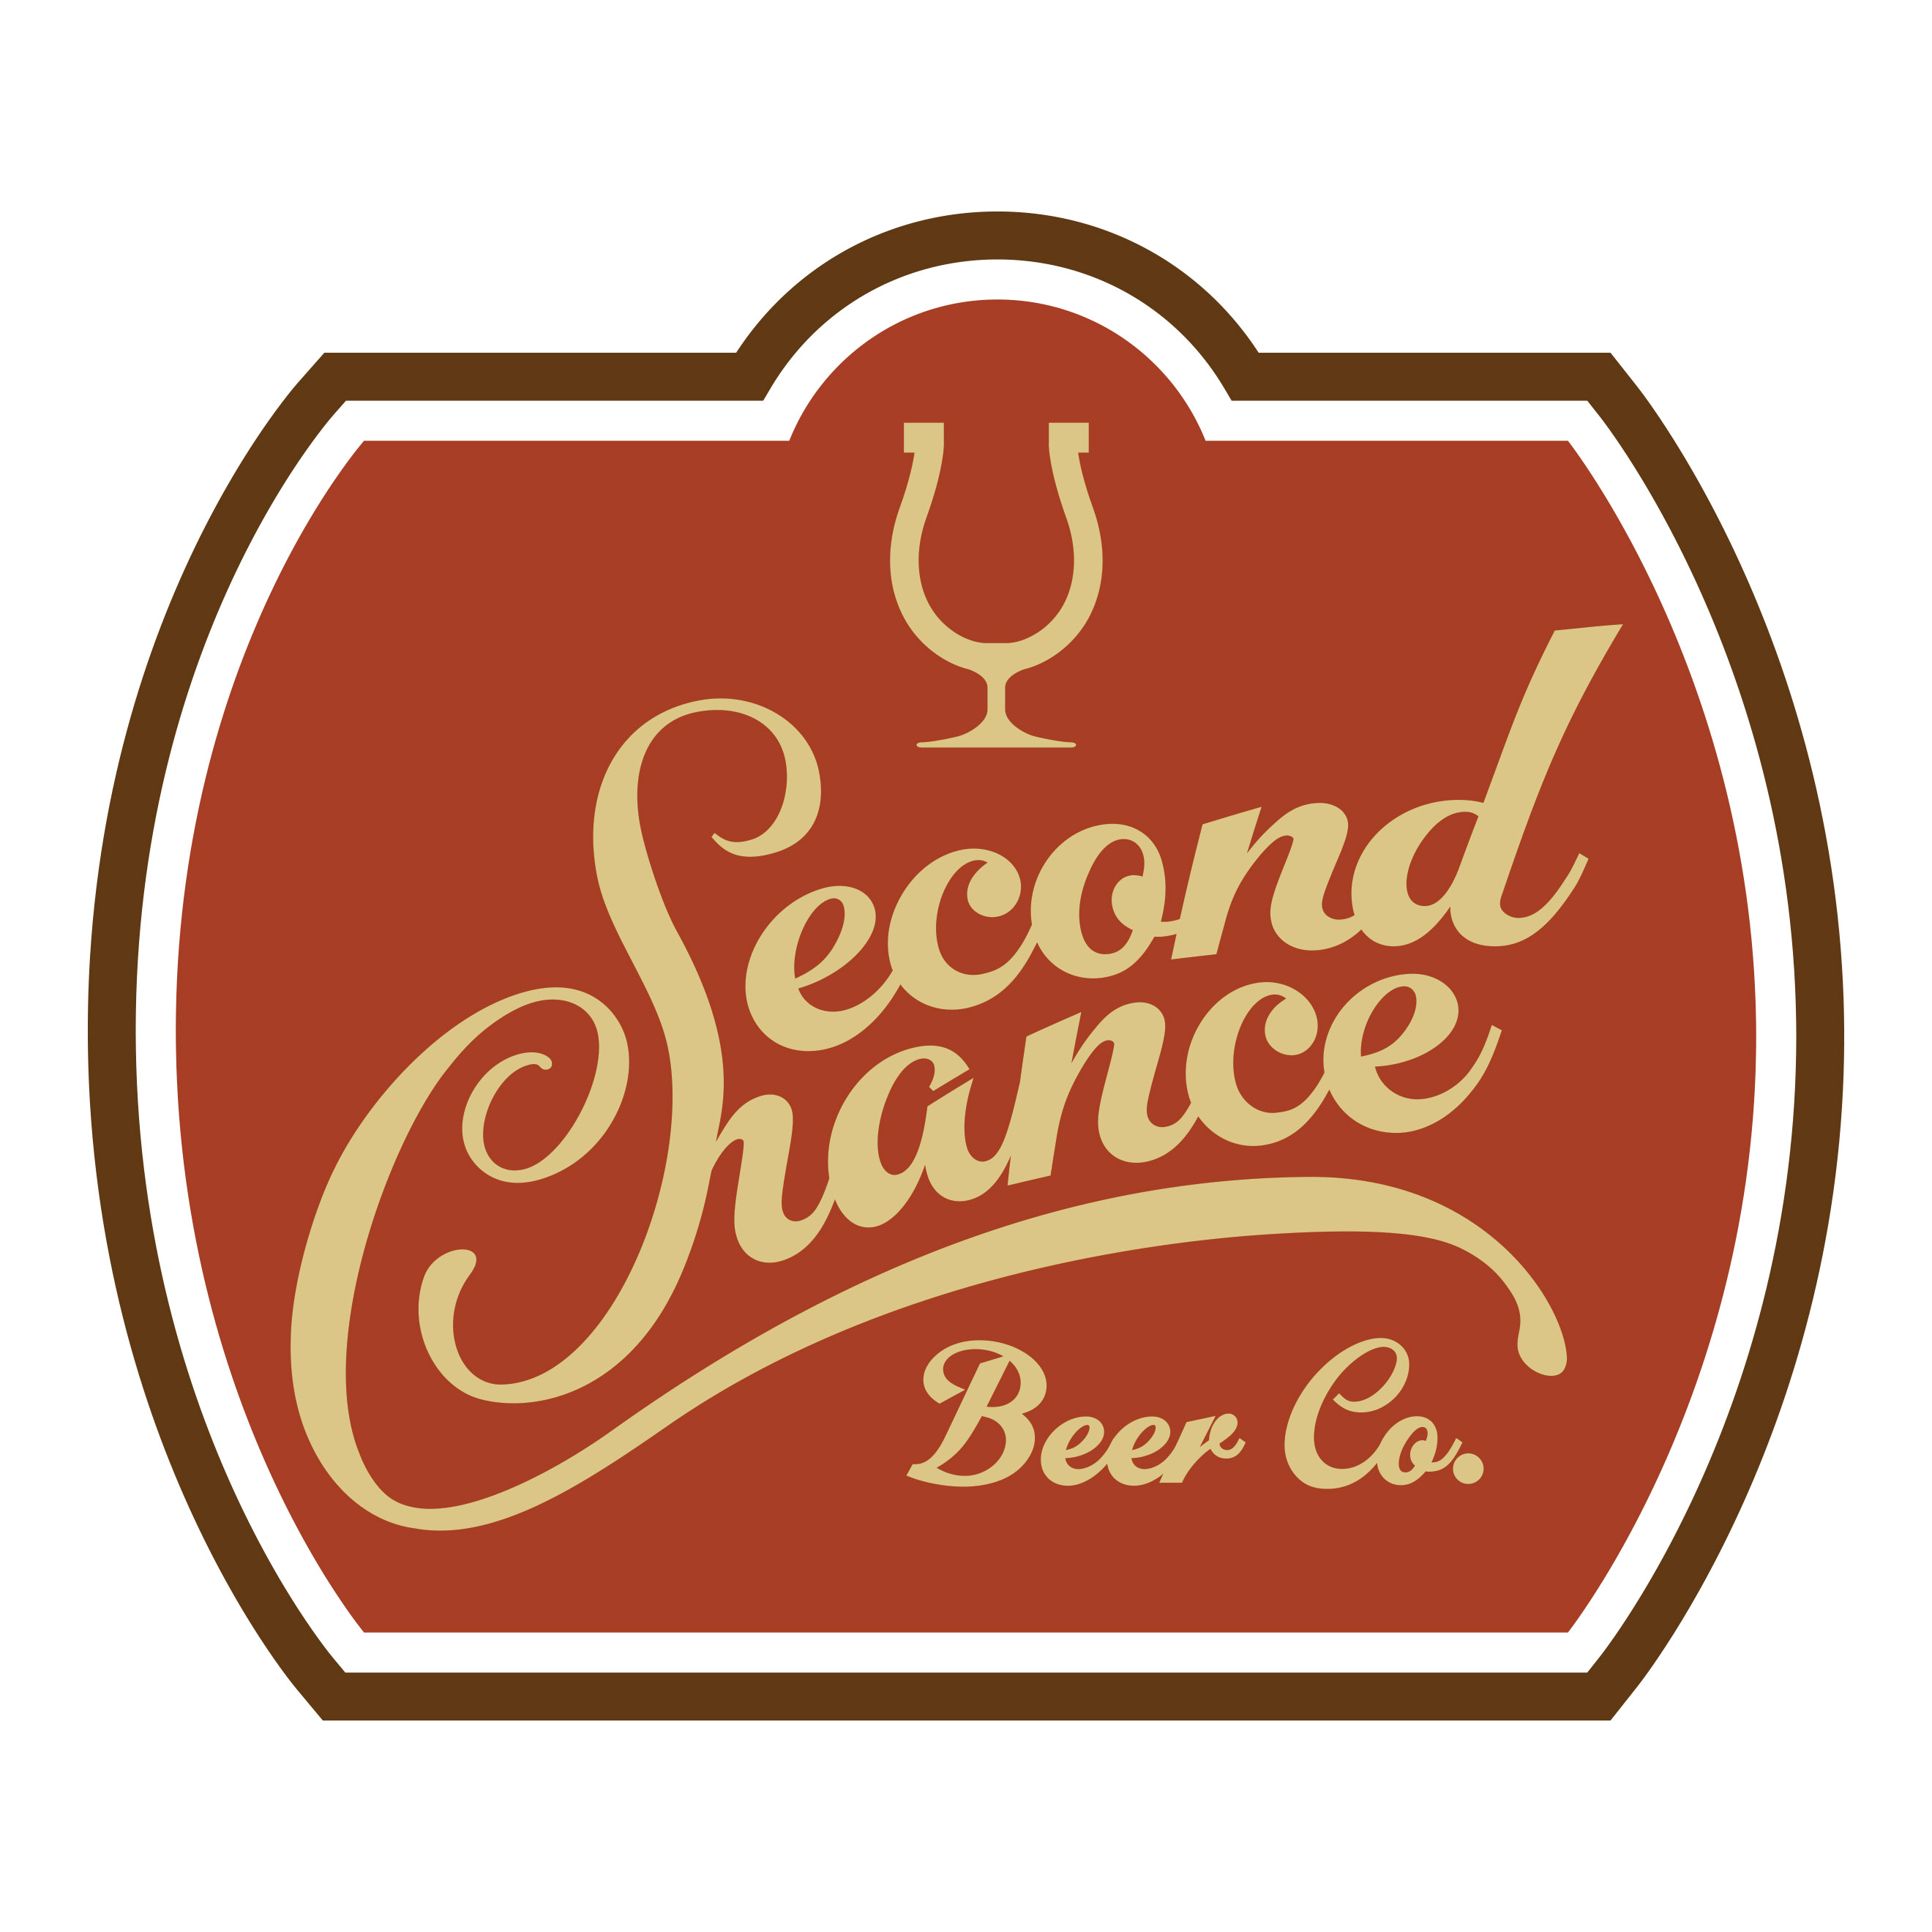 Second chance beer company